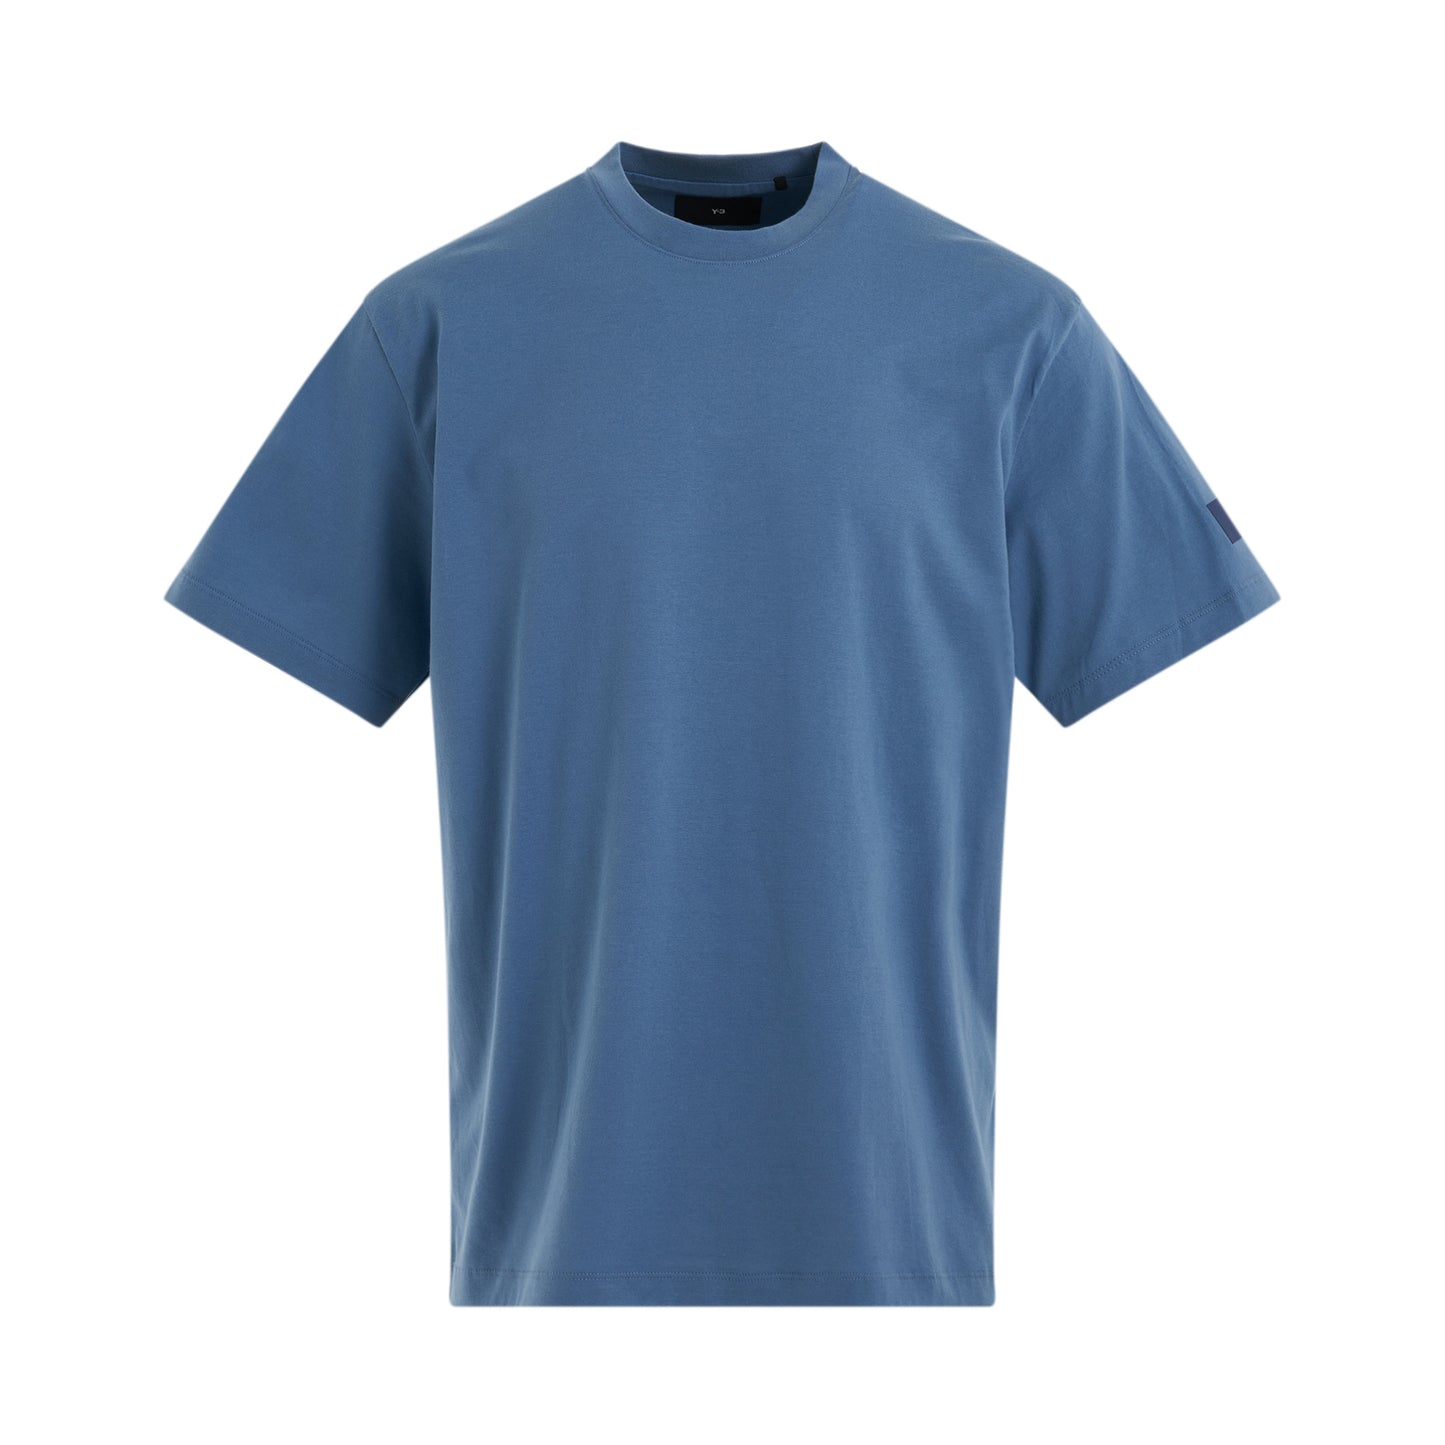 Relaxed Short Sleeve T-Shirt in Altered Blue